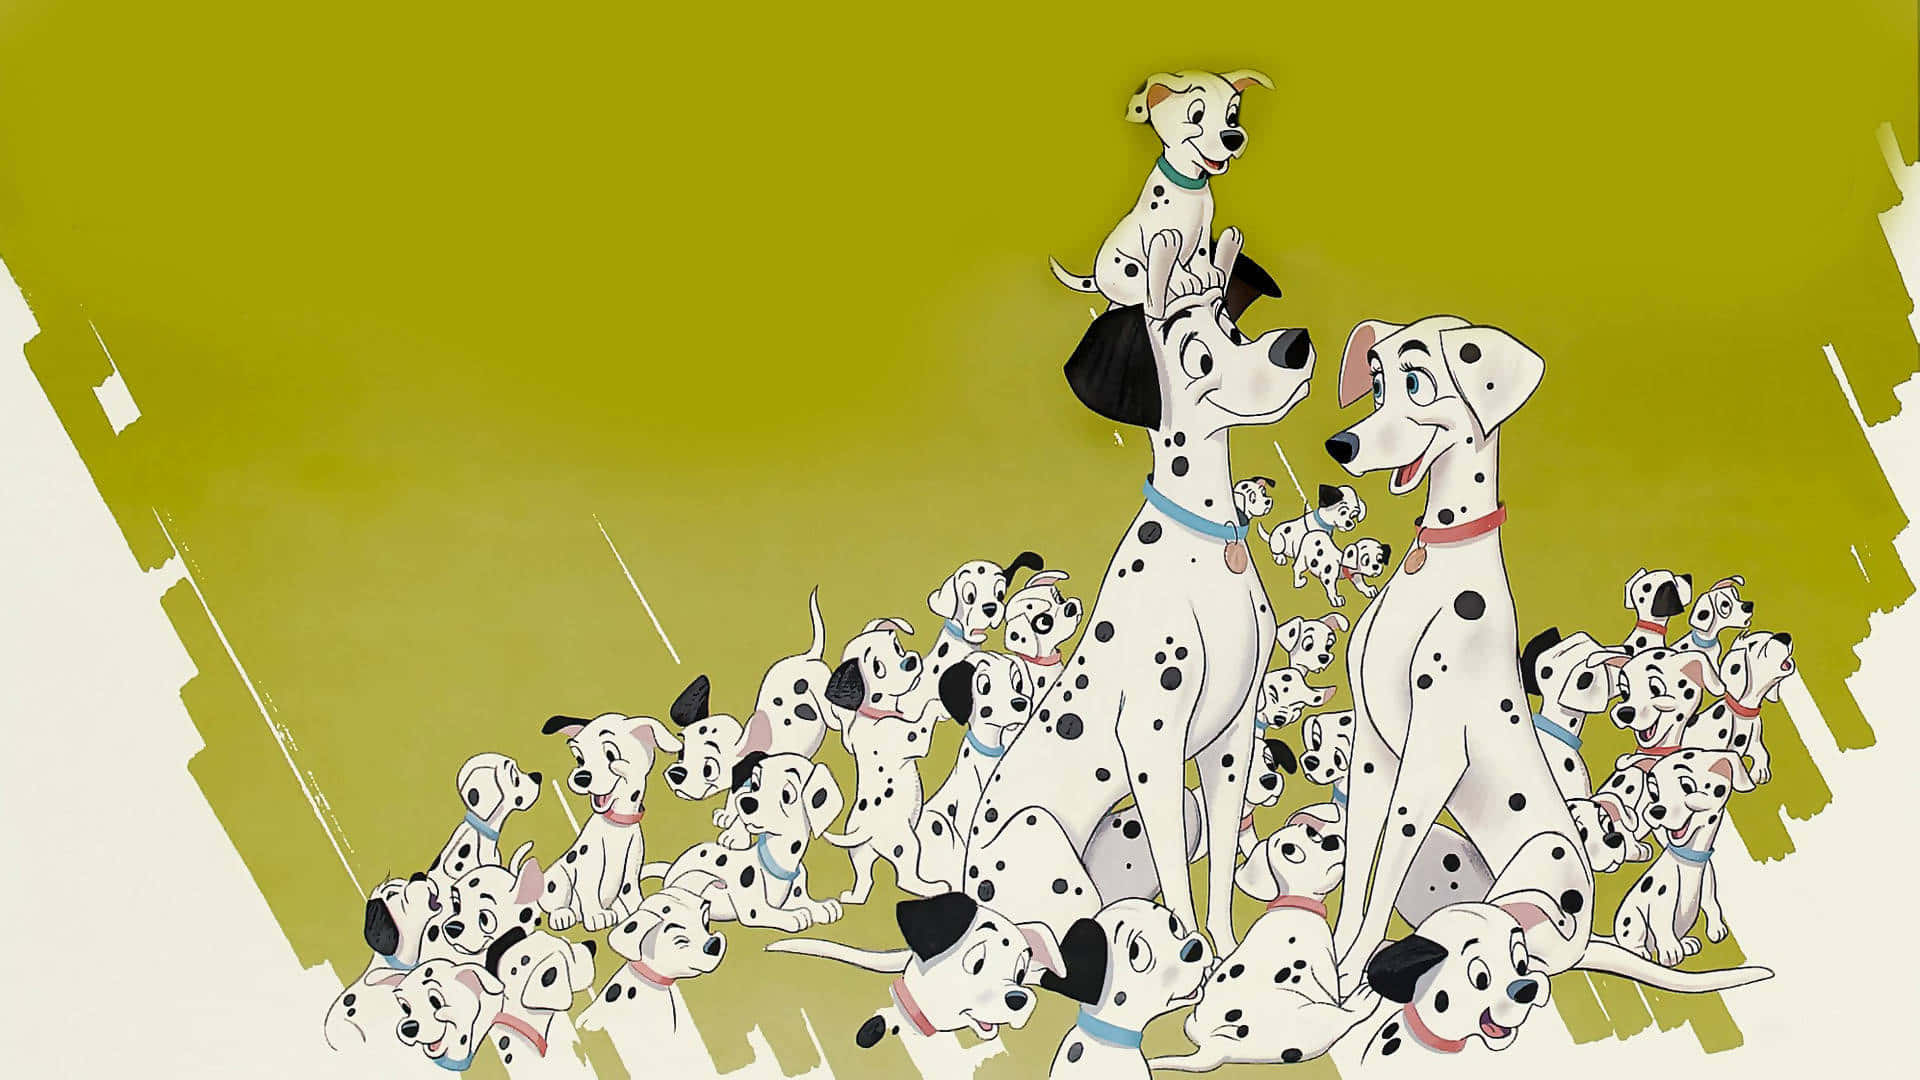 101 Dalmatian puppies playing together.